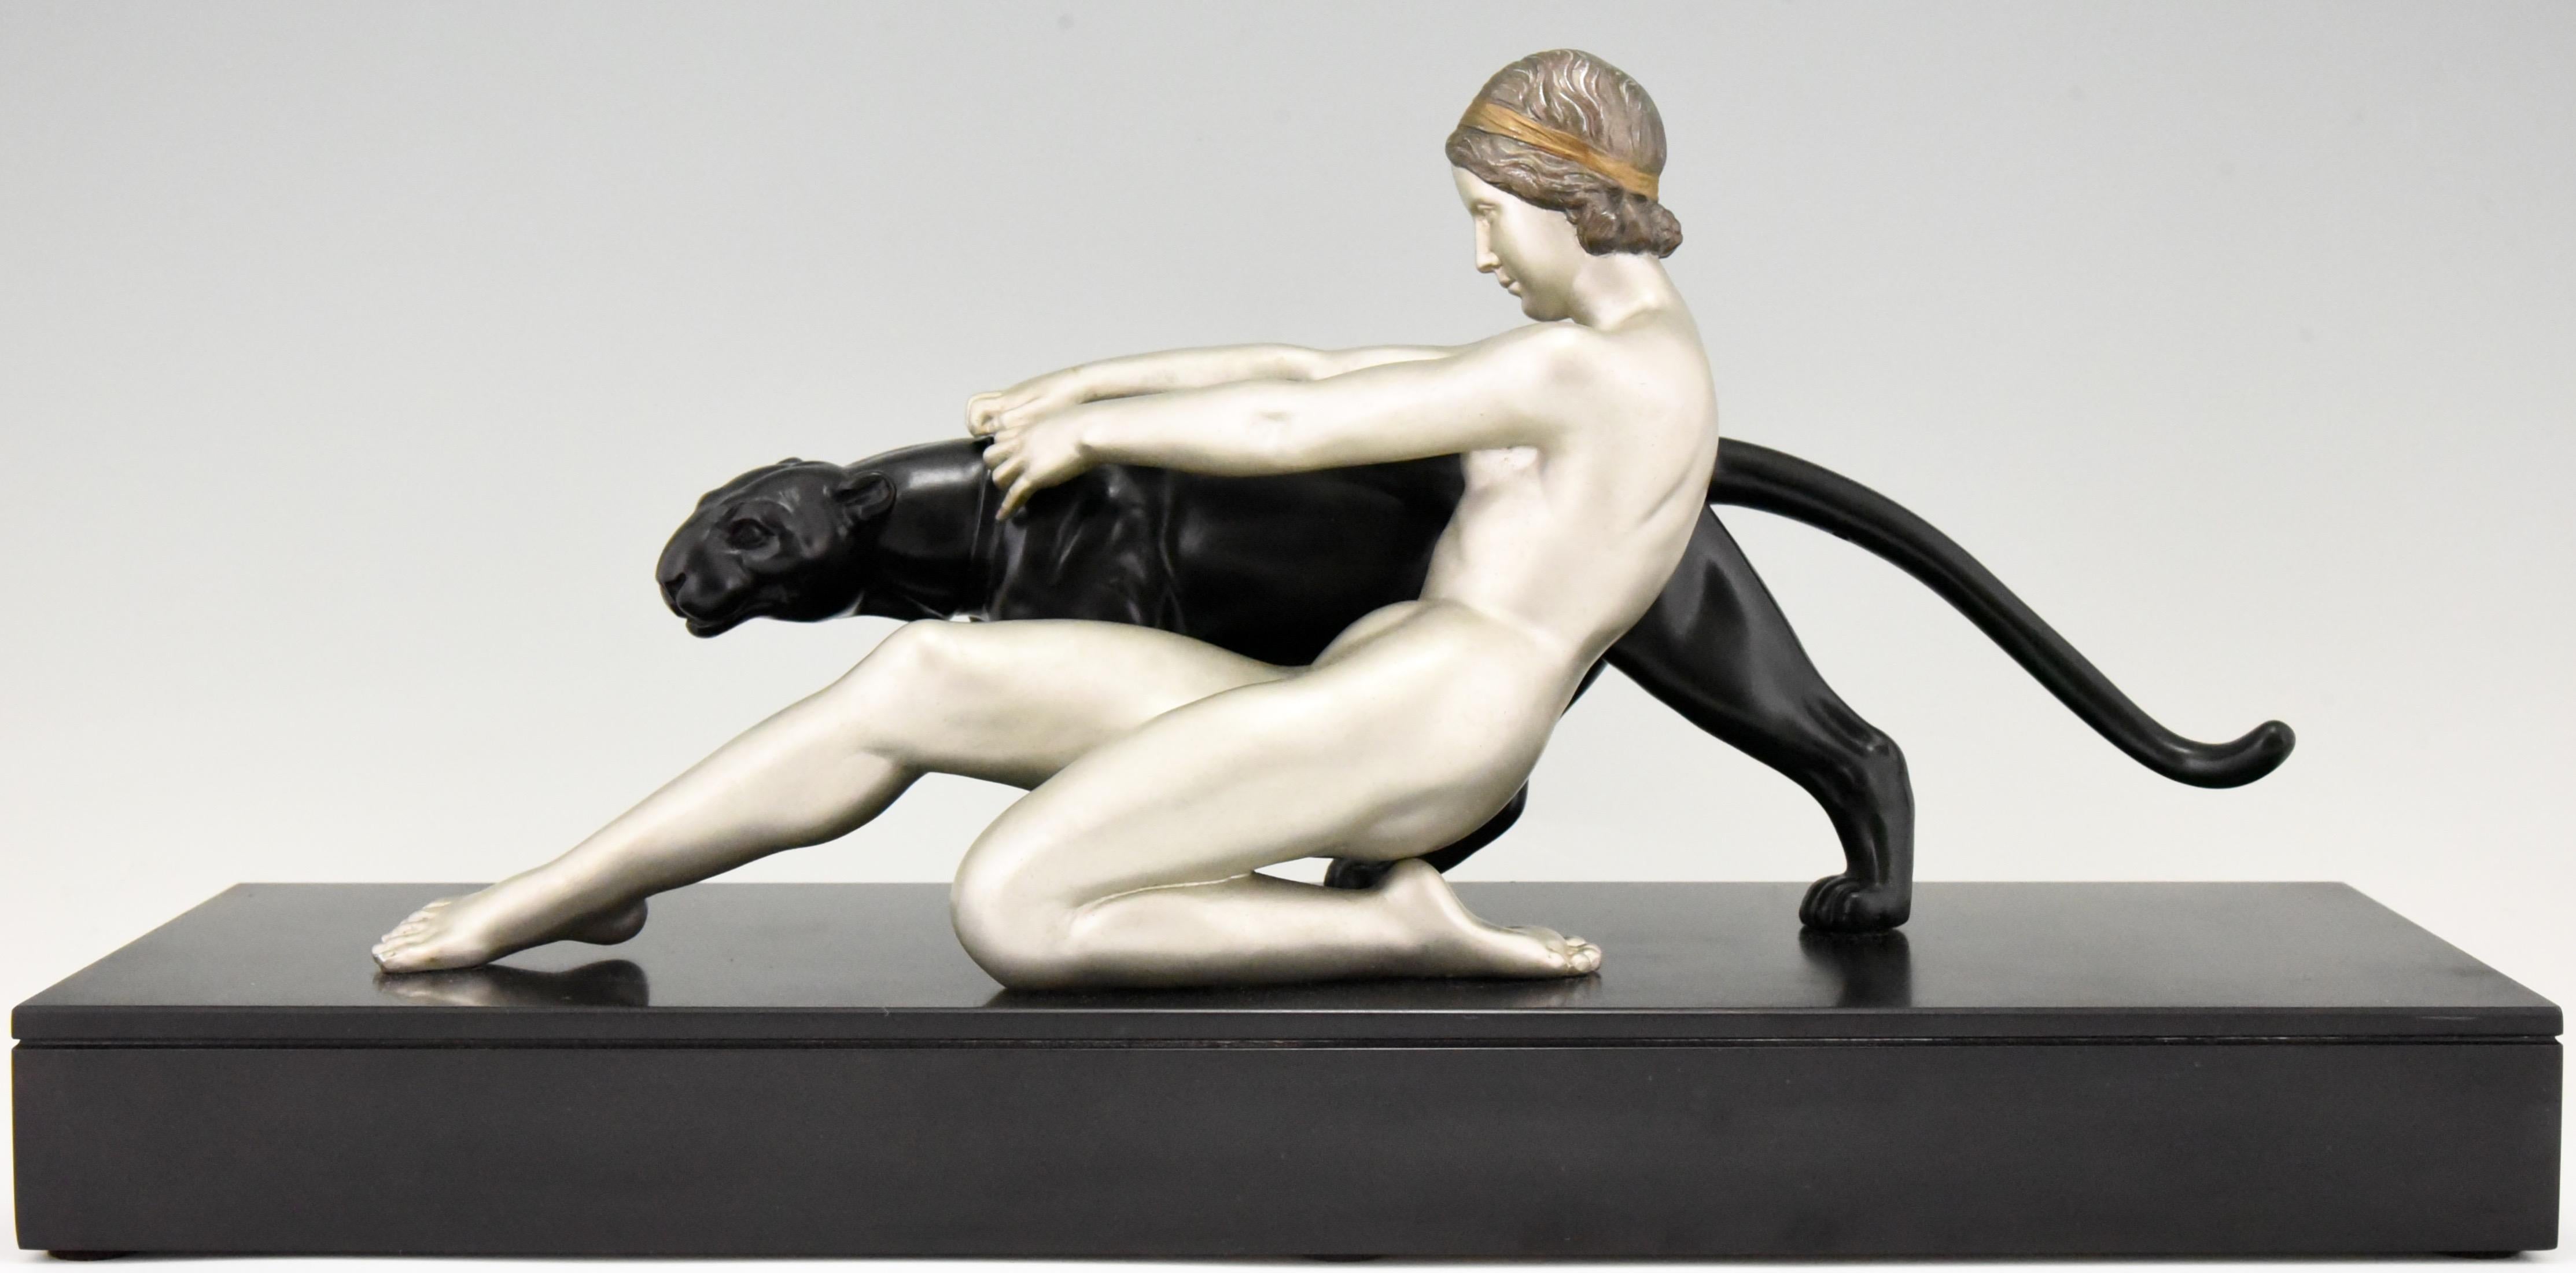 Art Deco sculpture of a nude with a panter on a Belgian black marble base by the French artist Alexandre Ouline, who worked in France, 1918-1940. The Art metal sculpture has a silver and black patina.
Literature:
“Animals in bronze” by Christopher